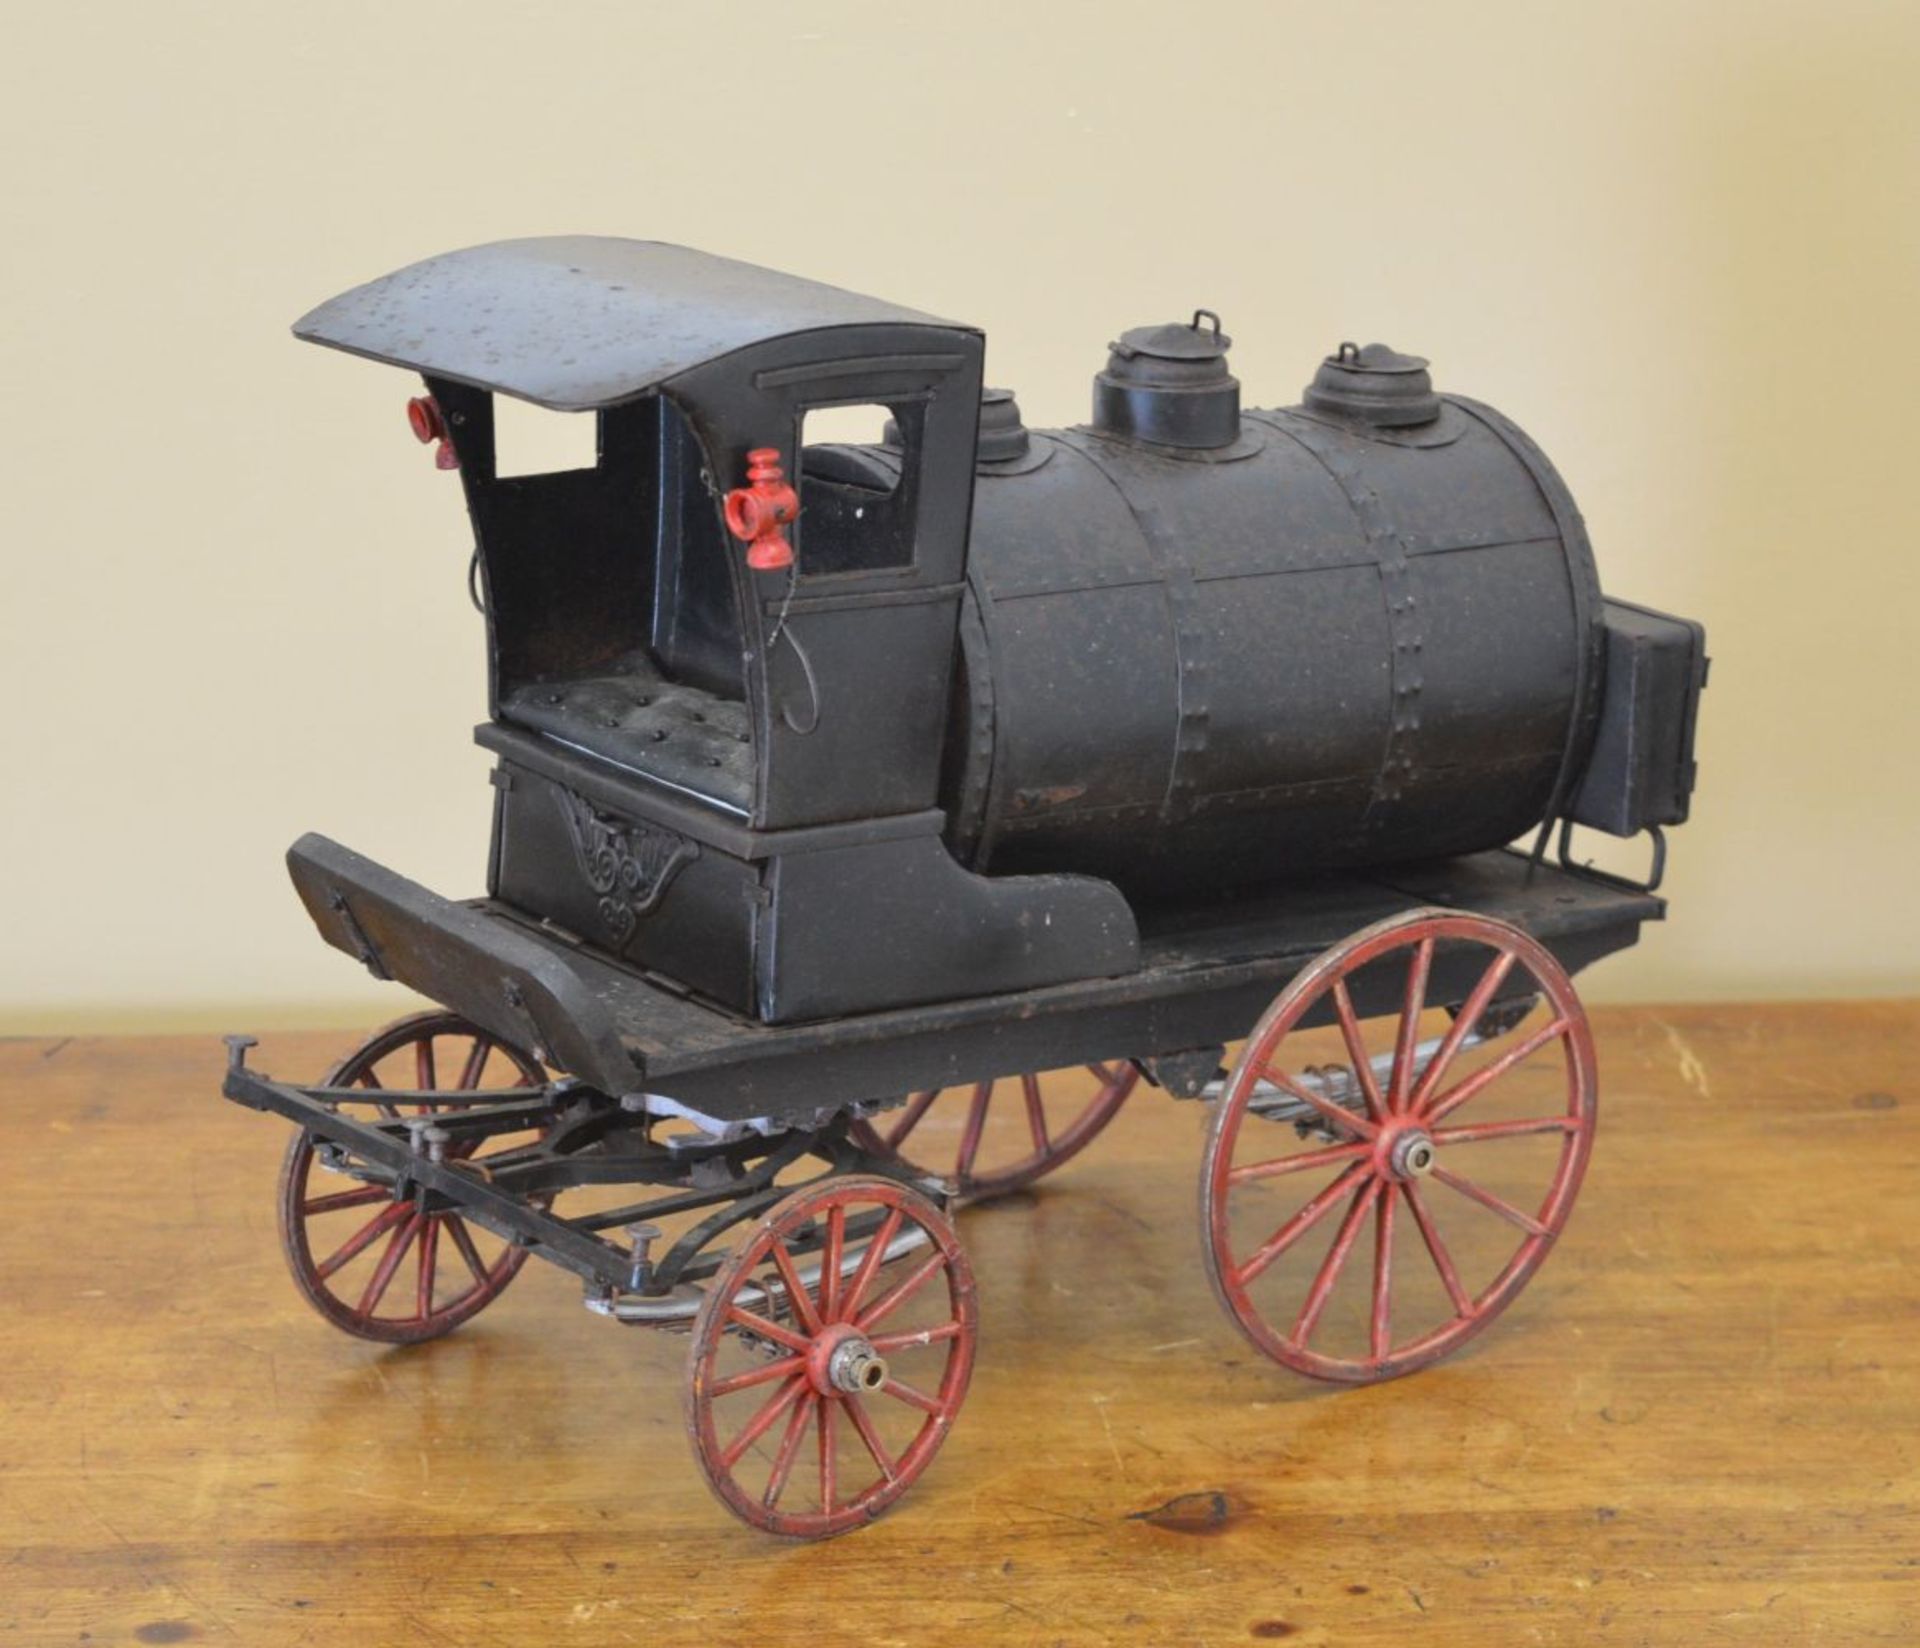 METAL MODEL OF A STEAM ENGINE - Image 3 of 3